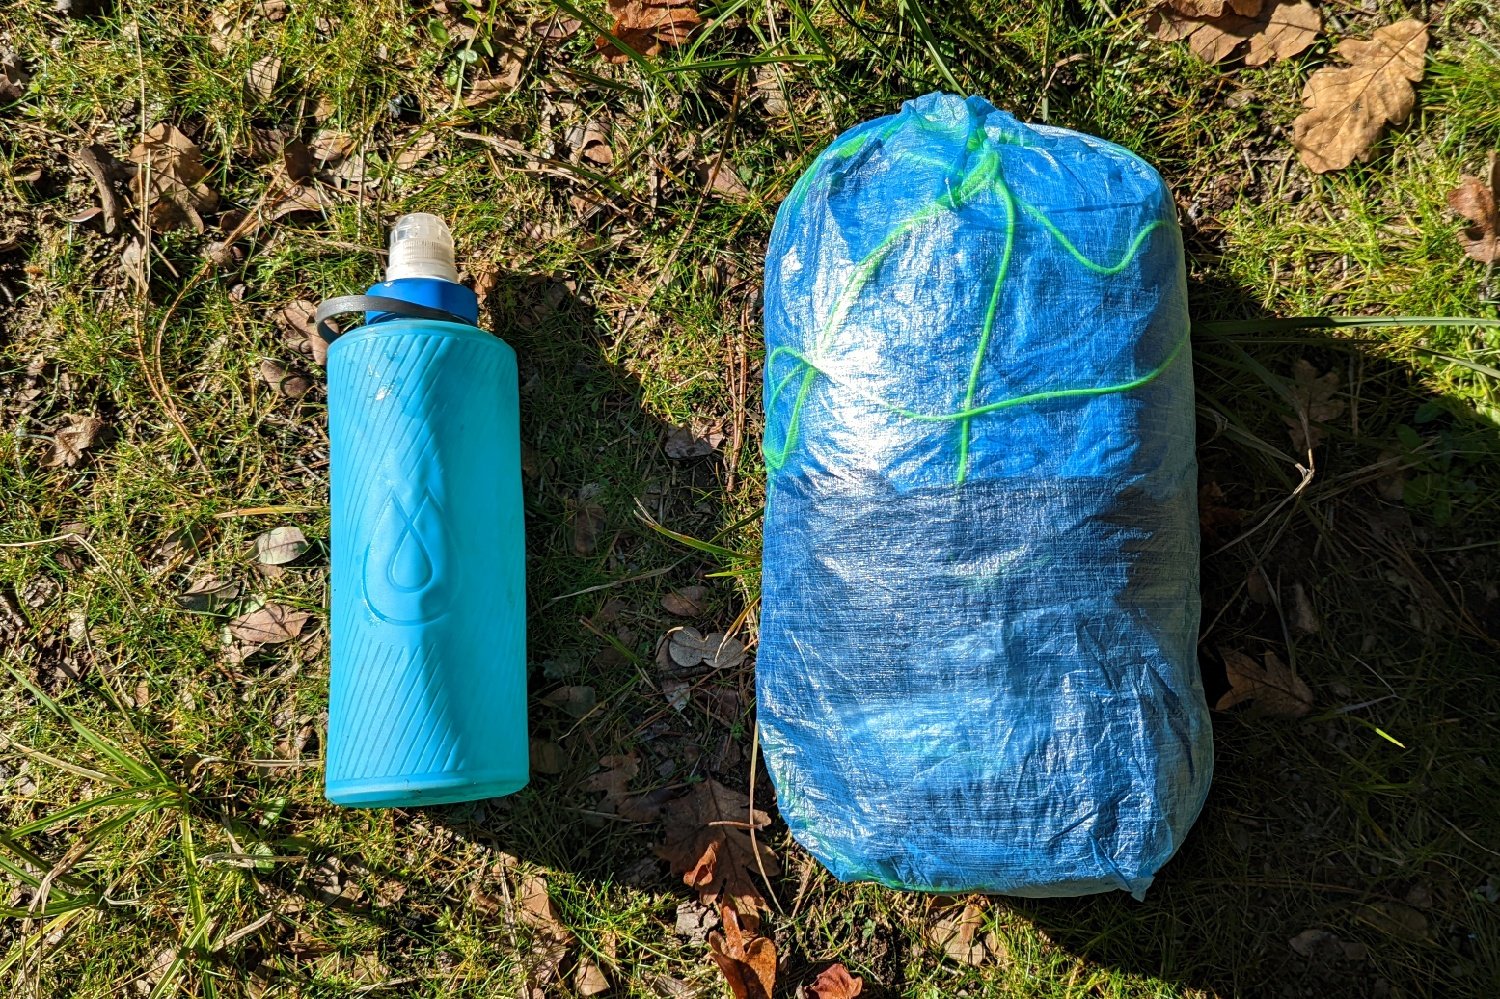 The Zpacks Plex Solo tent in a stuff sack next to a one liter water bottle